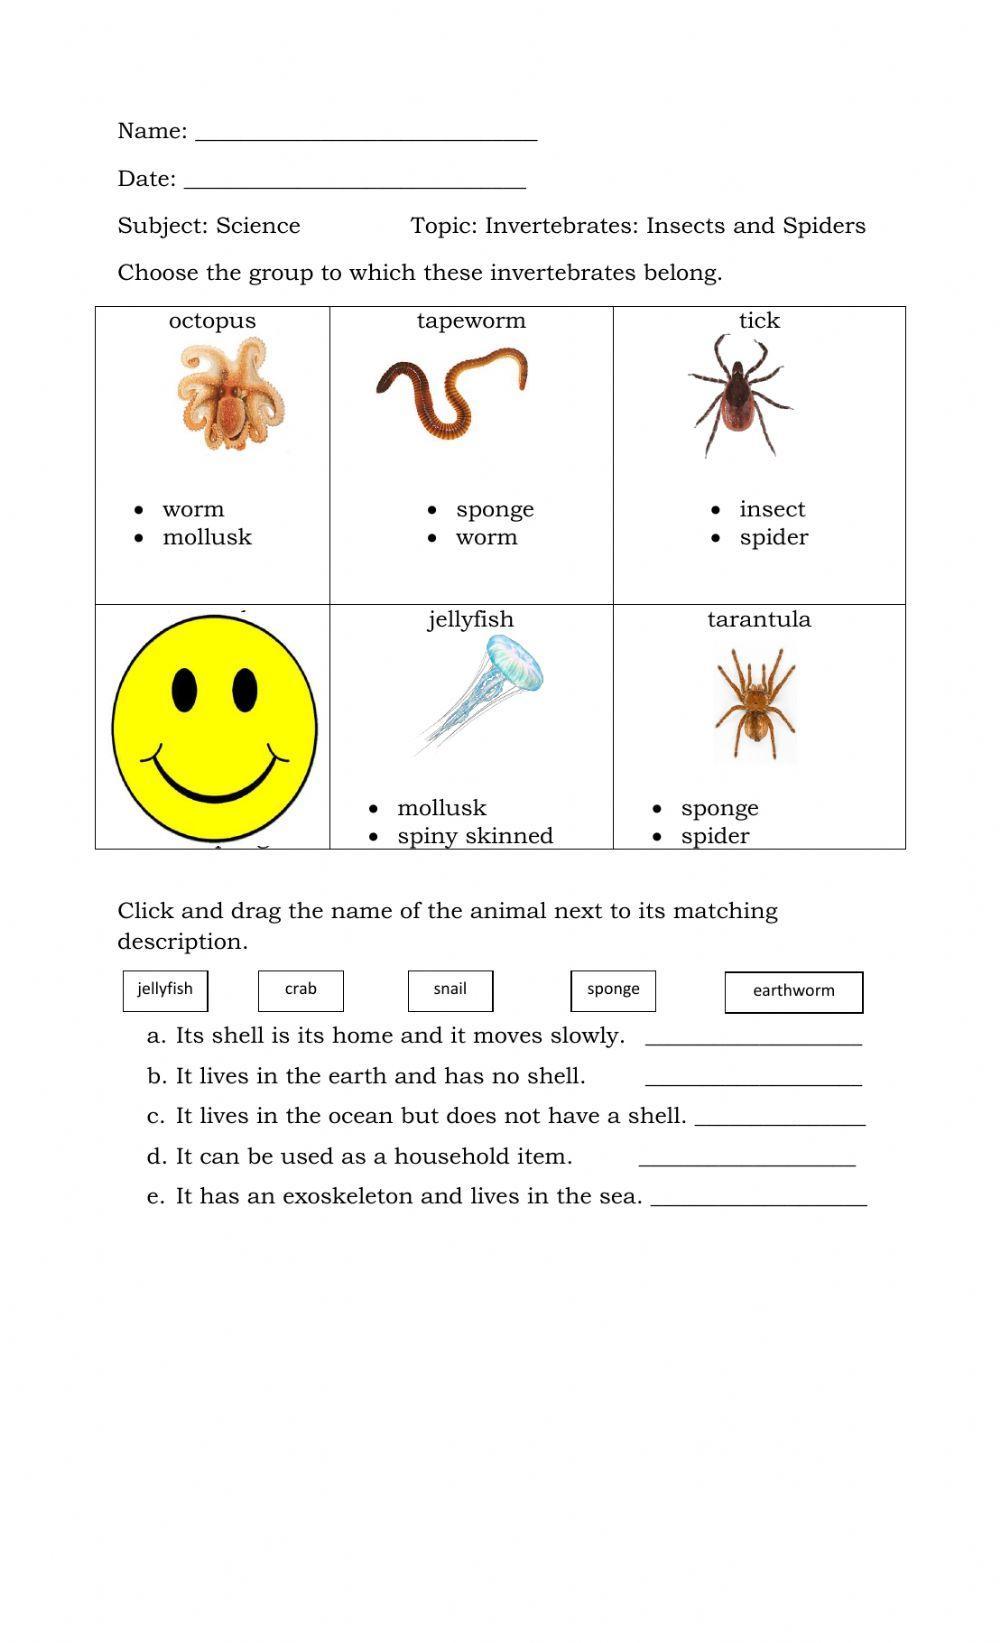 Invertebrates: Insects and Spiders